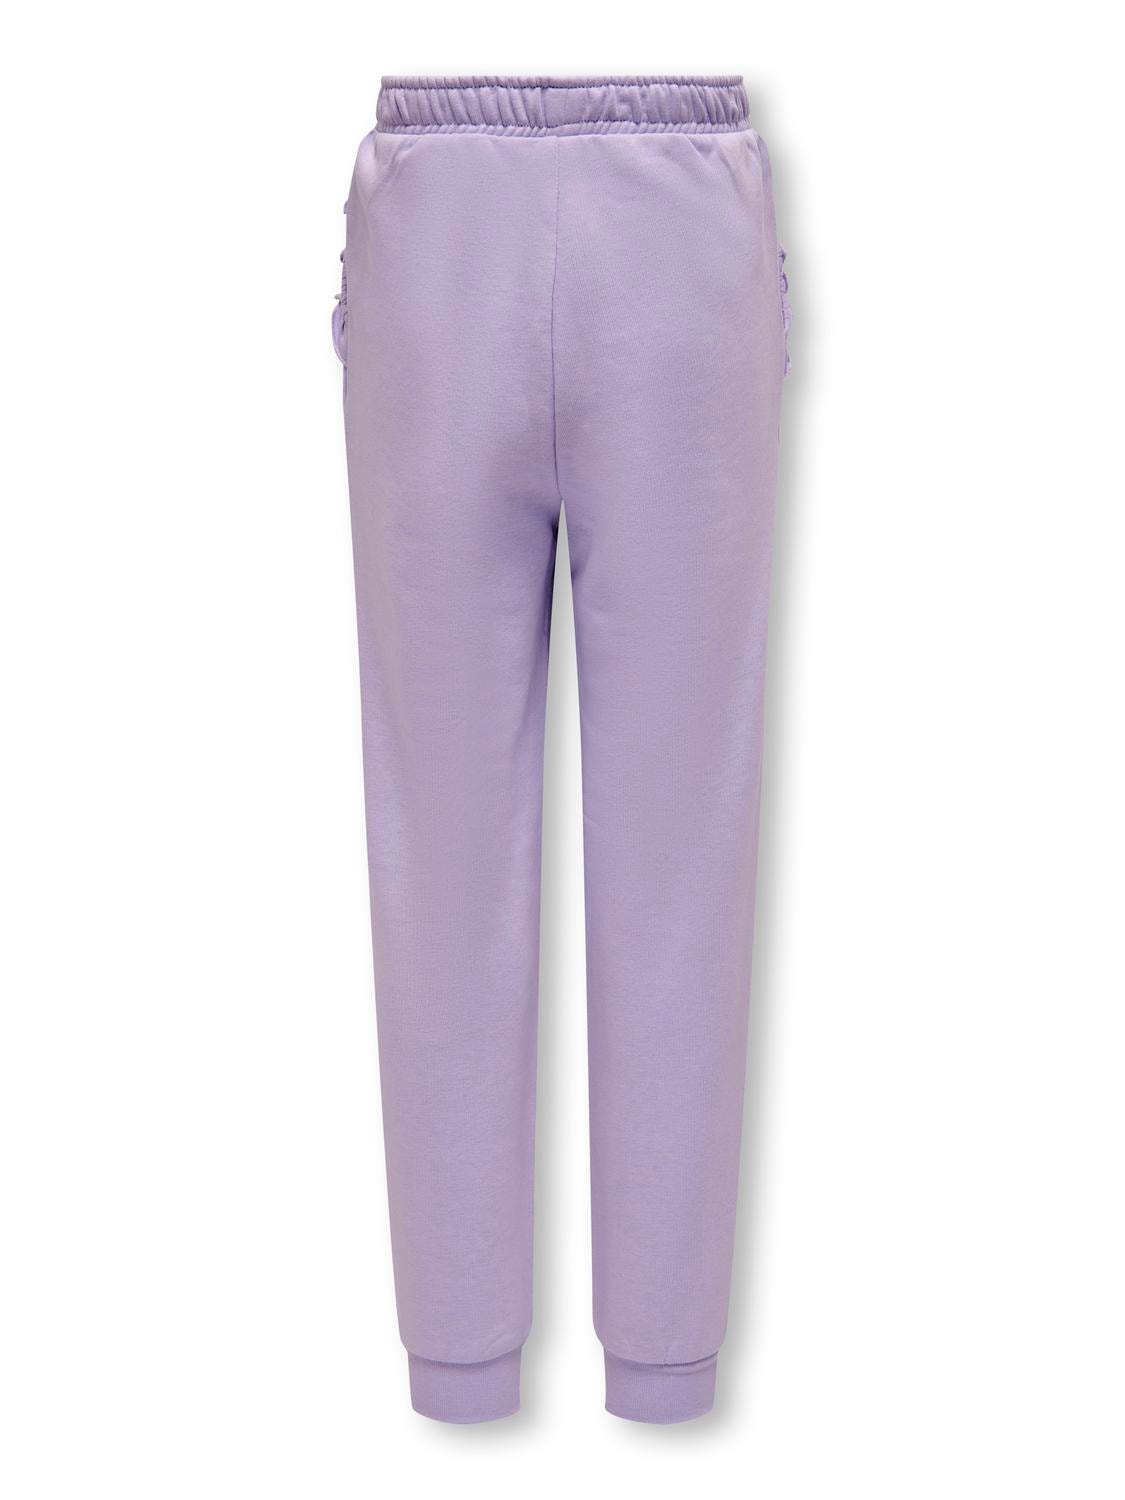 ONLY Sweatpants With Frills -Purple Rose - 15281471